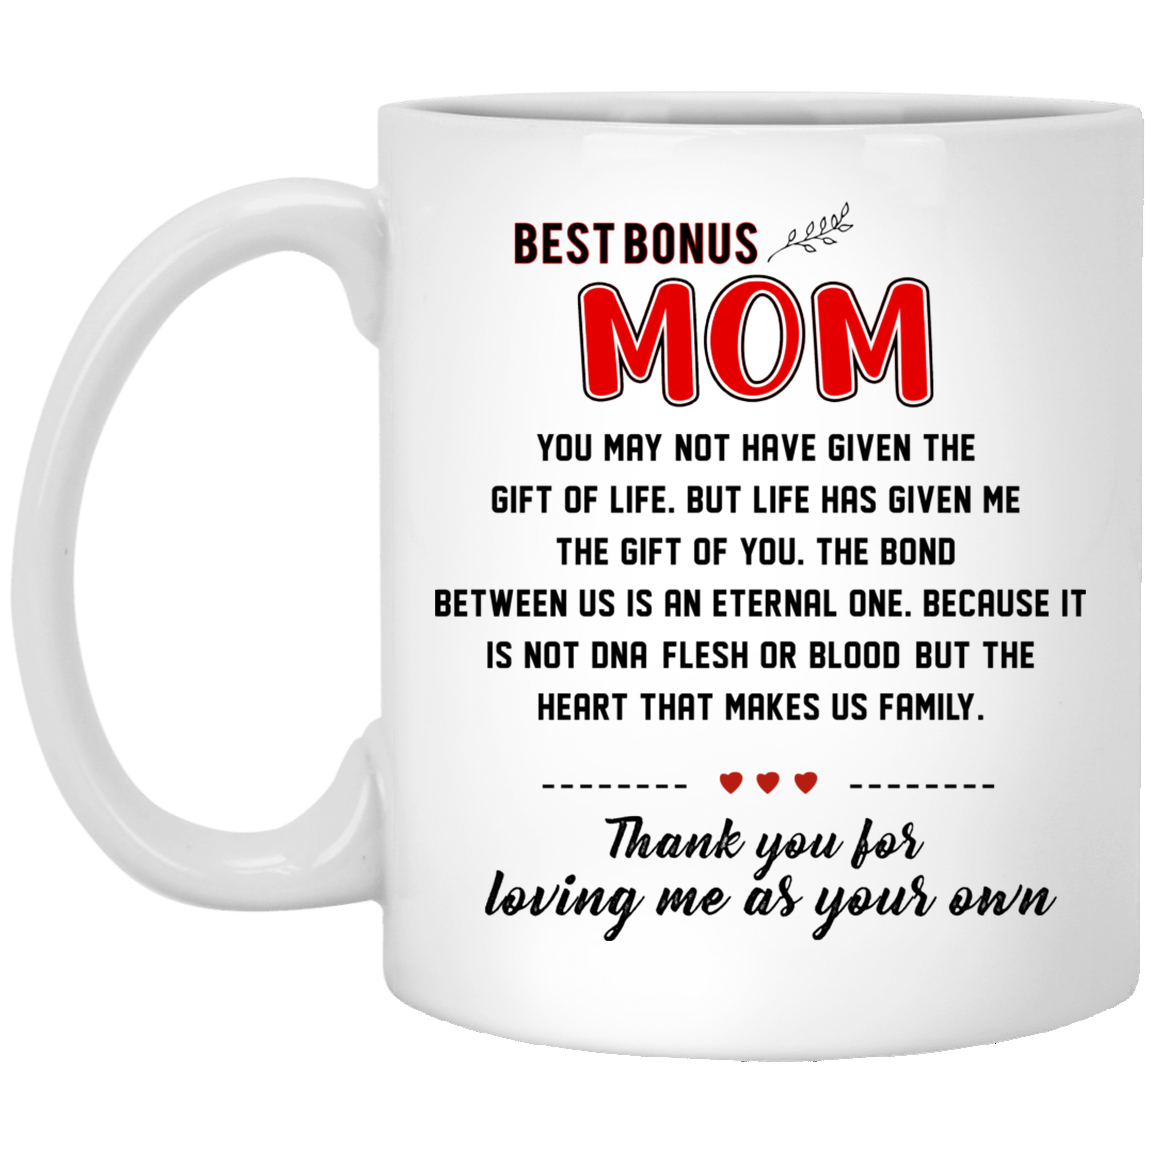 Thank You for Giving Me Life - mom mug, funny cup for mother